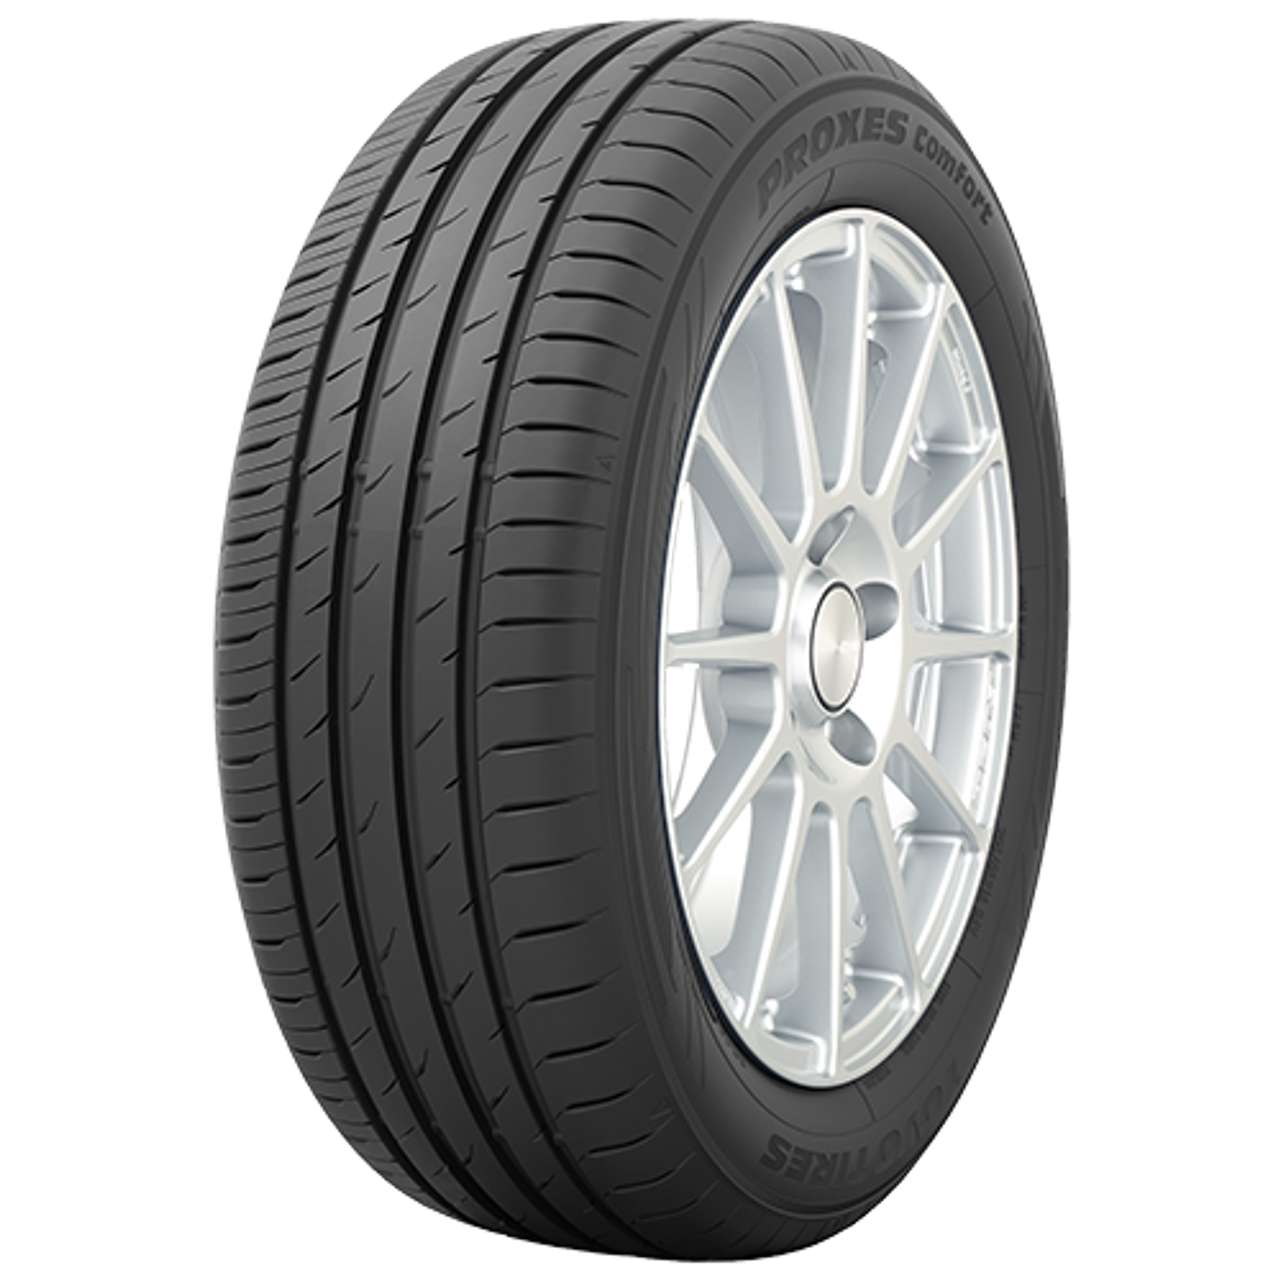 TOYO PROXES COMFORT 185/55R16 87V BSW